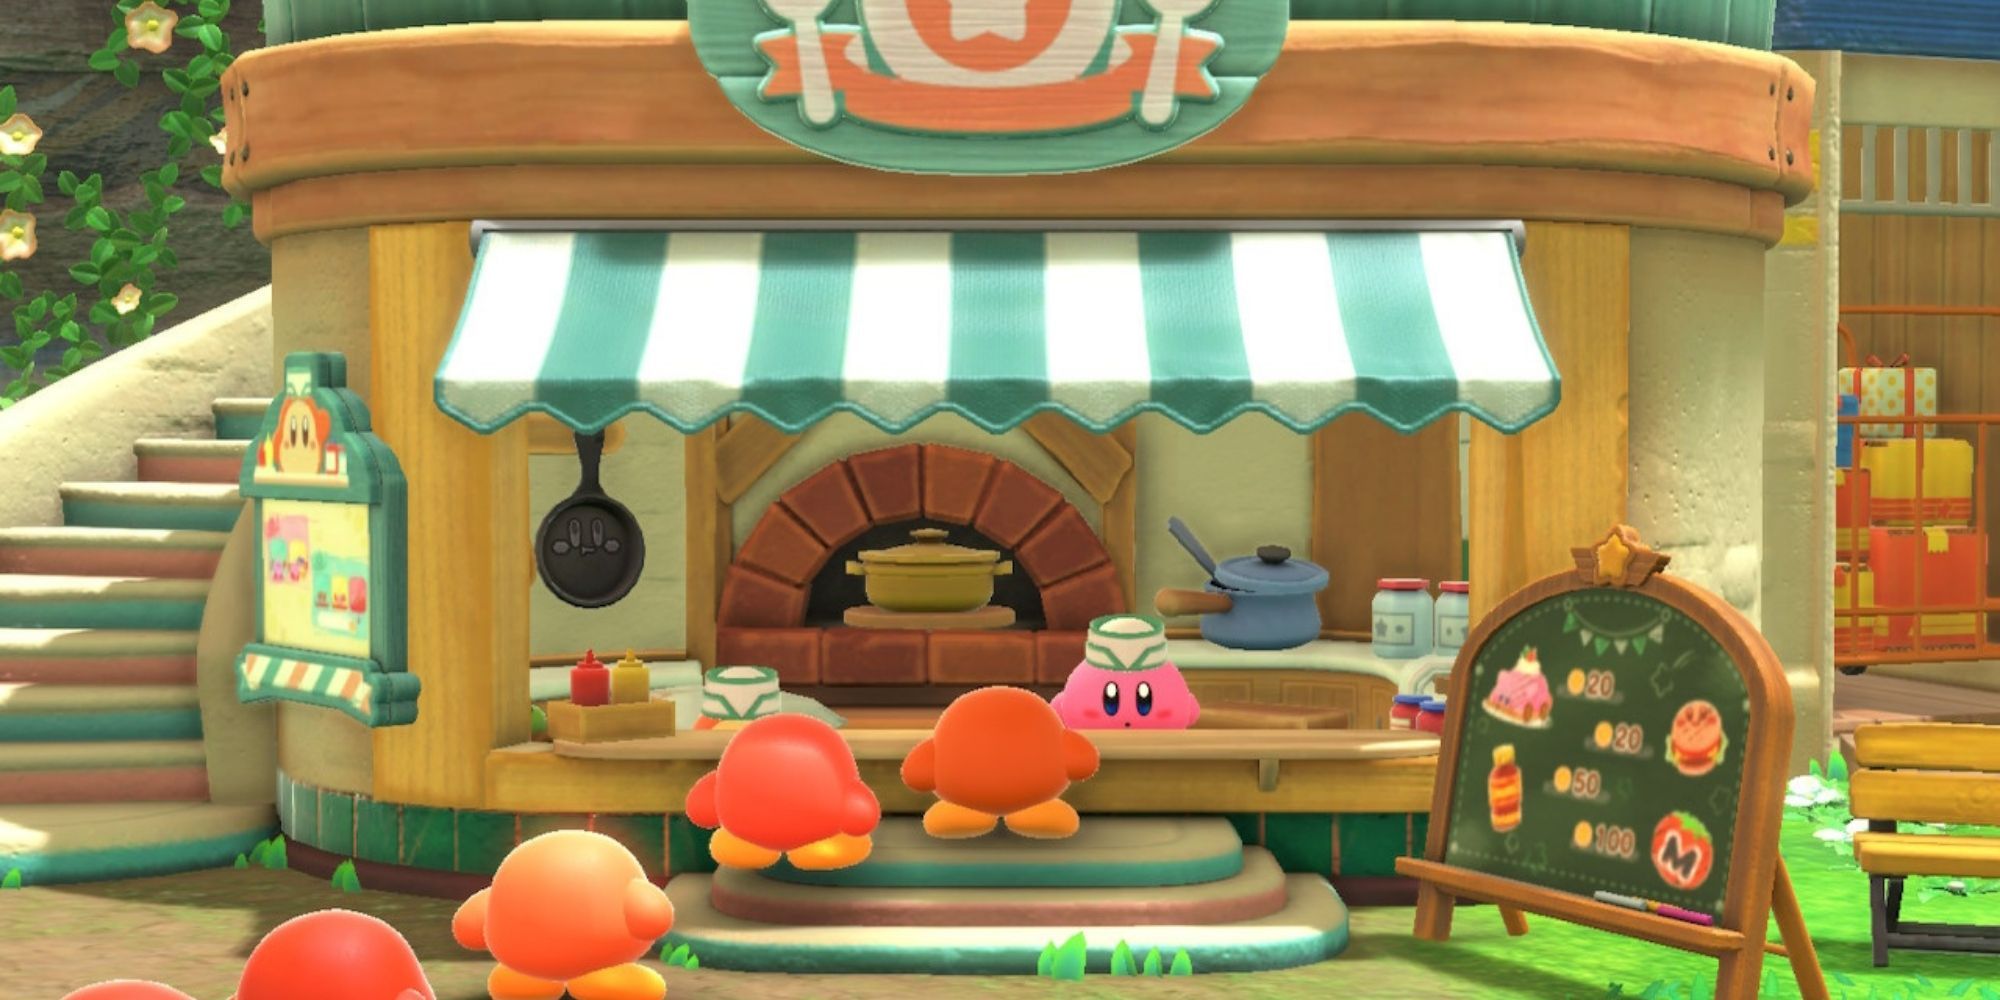 Kirby and the Forgotten Land Waddle Dee Cafe Kirby Prepares For His Shift As Hungry Waddle Dees Line Up For Food